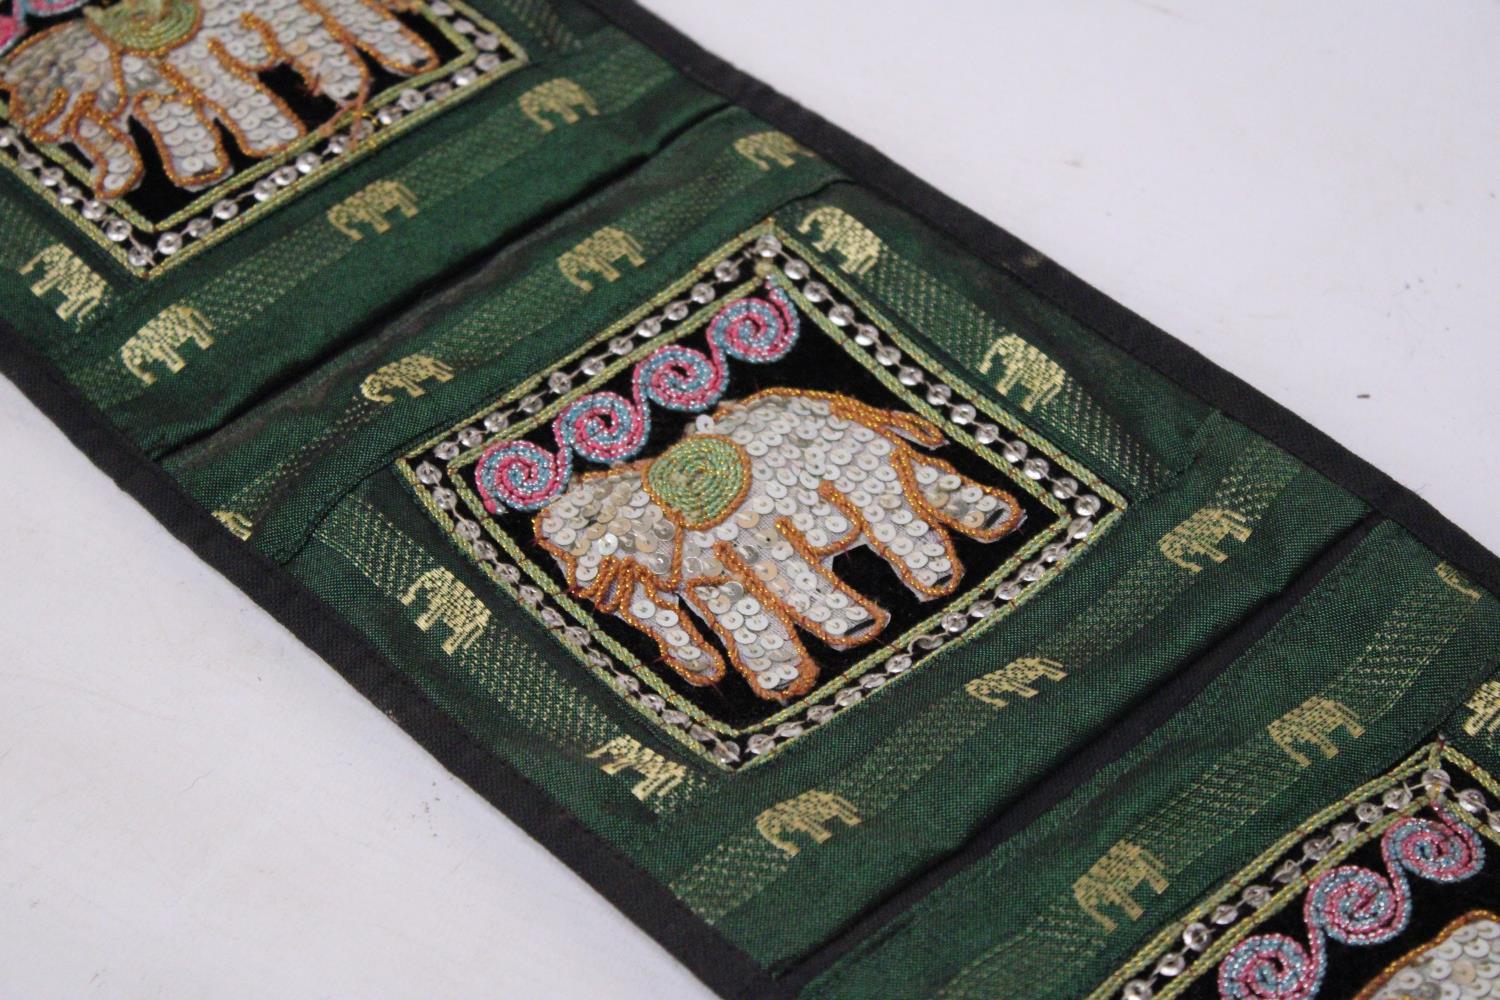 A VINTAGE THAI FABRIC WALL HANGING THREE POCKET ORGANIZER WITH ELEPHANT DECORATION - Image 2 of 4